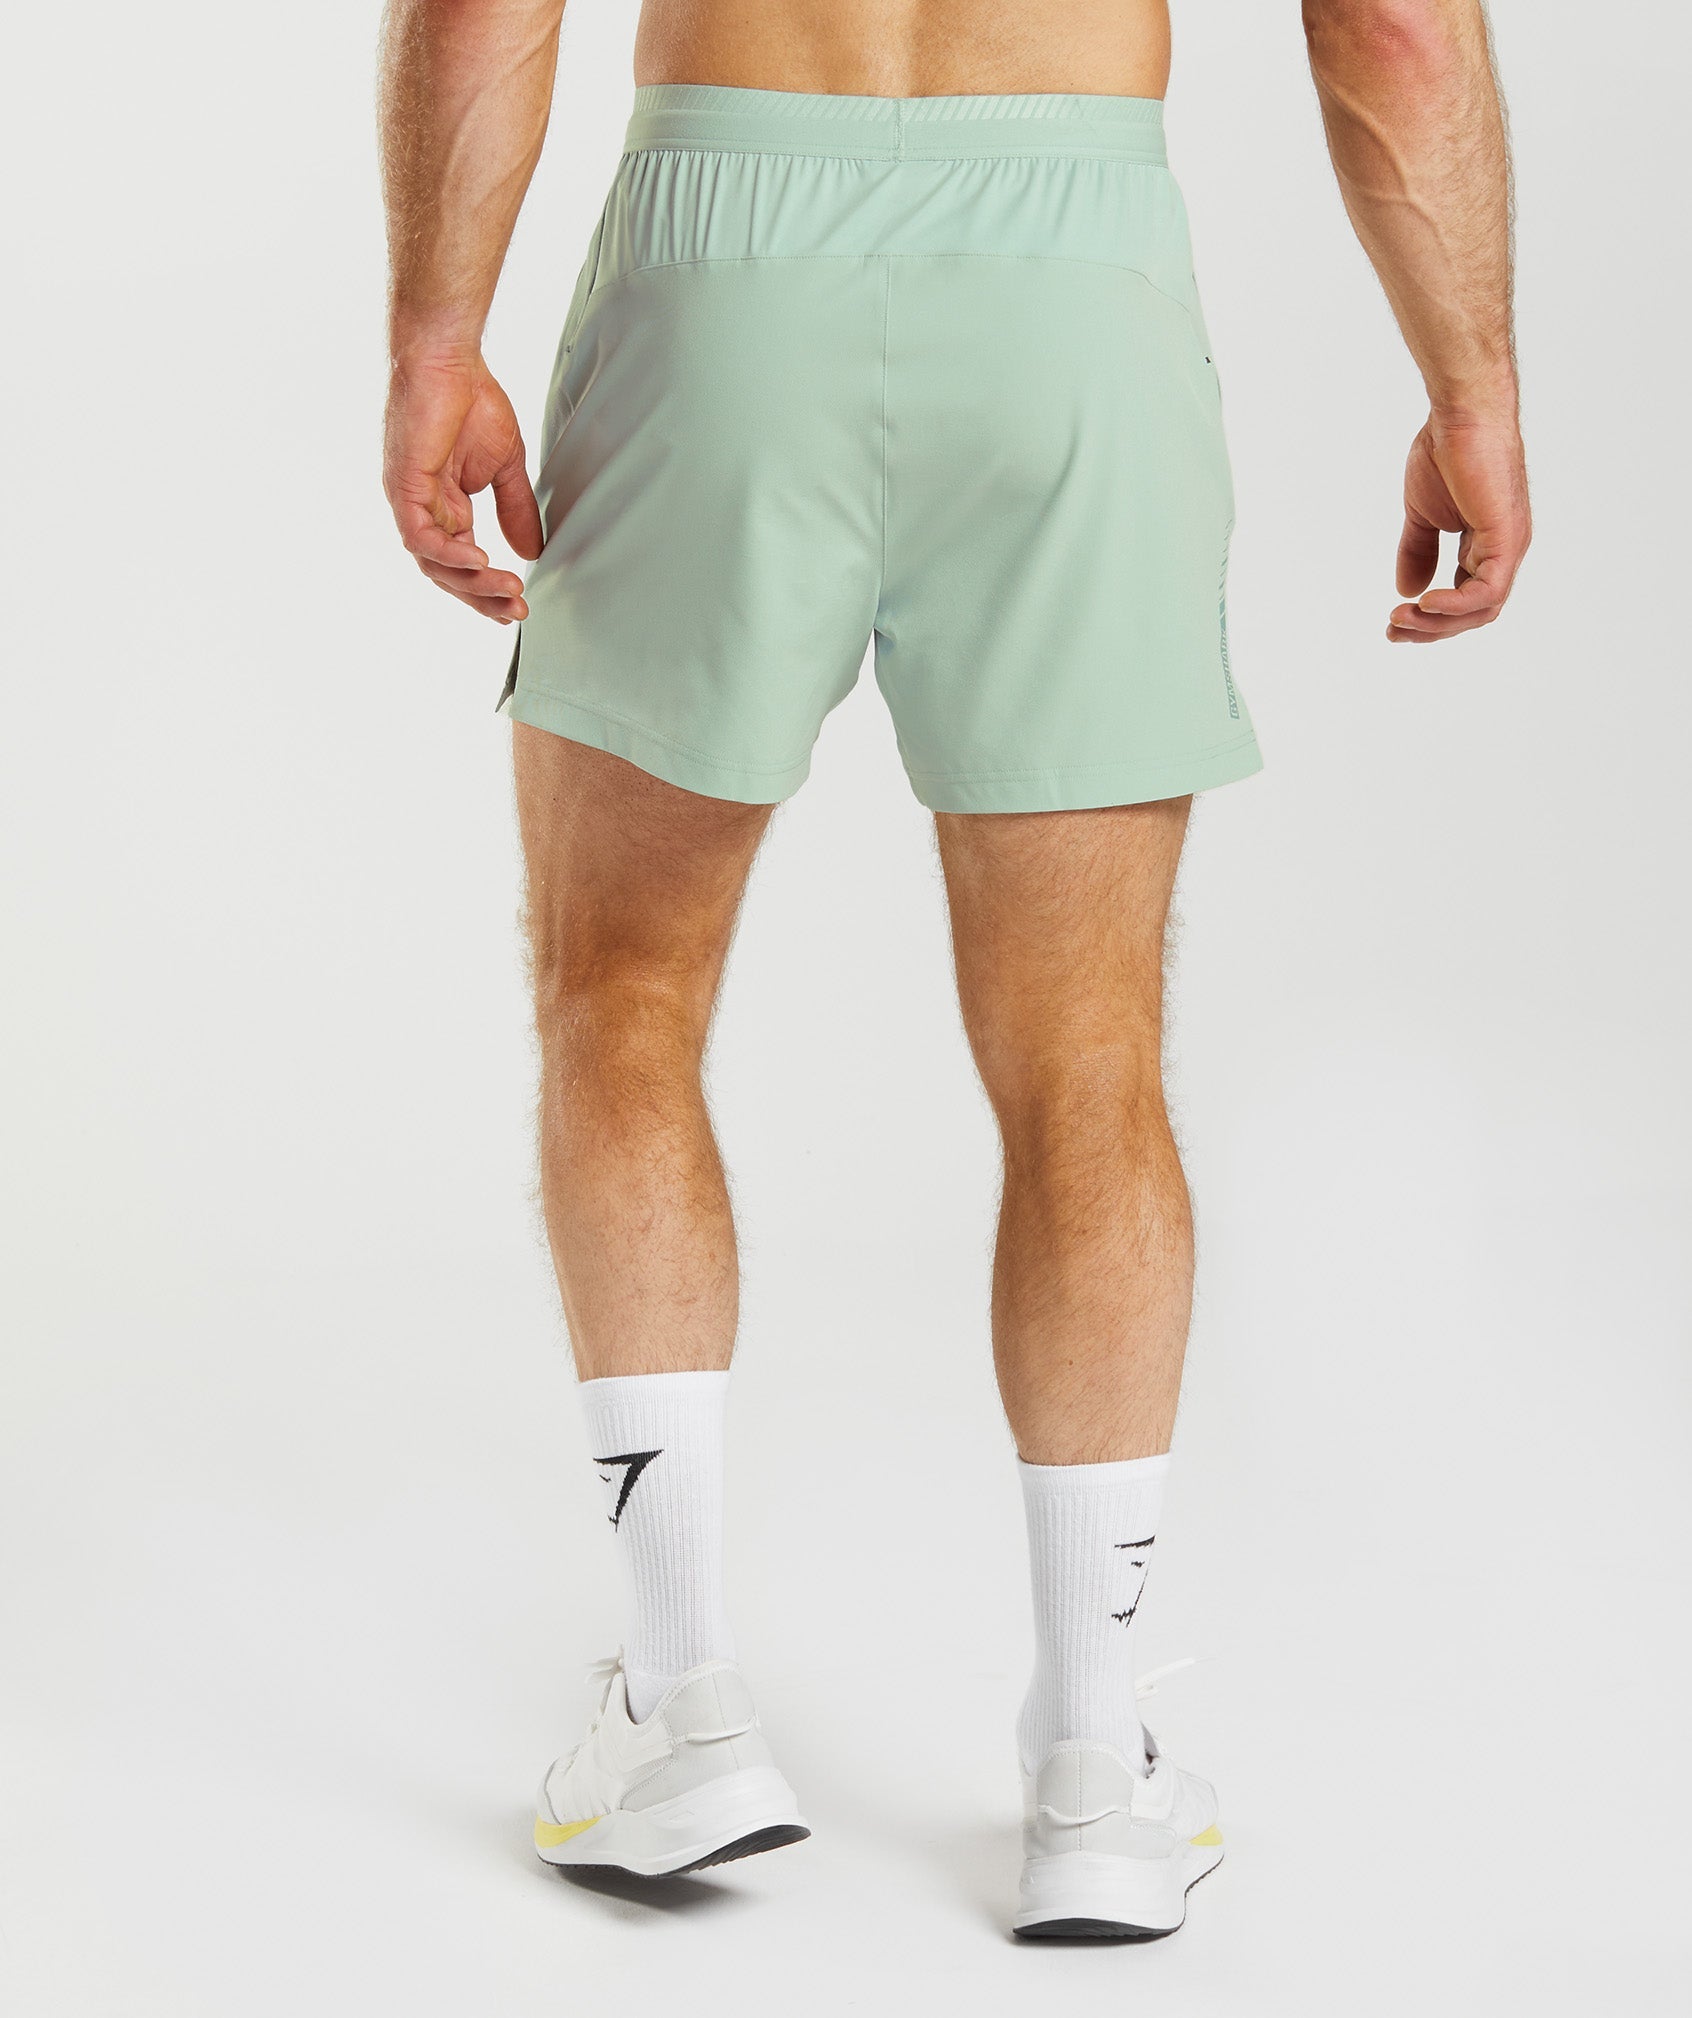 Apex 5" Hybrid Shorts in Frost Teal - view 2